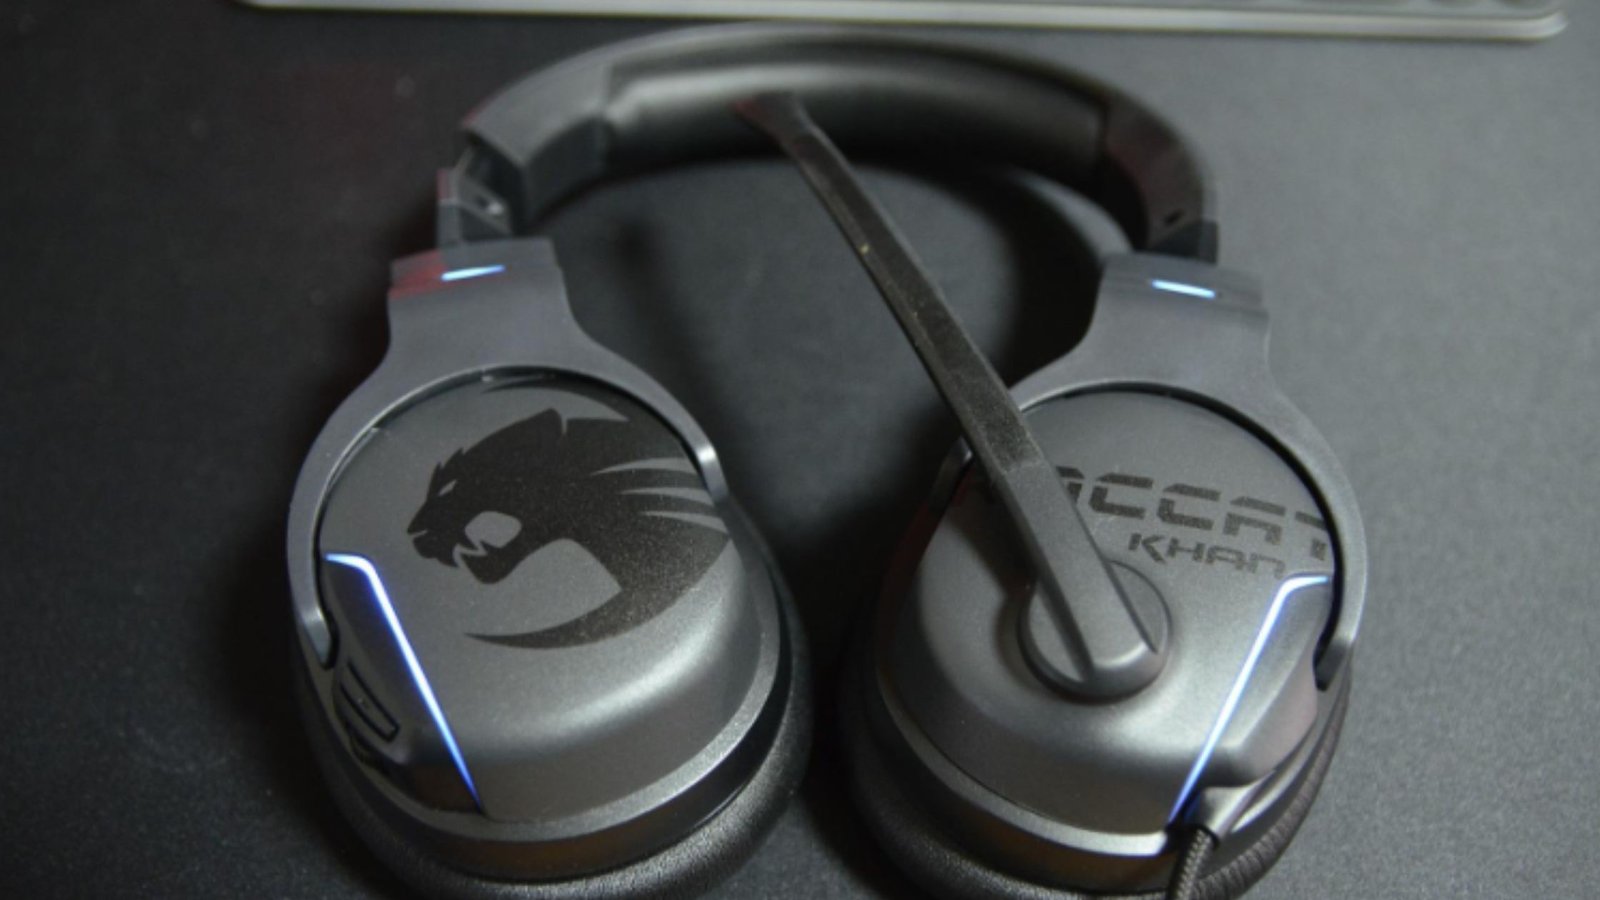 roccat khan aimo 7.1 surround gaming headset